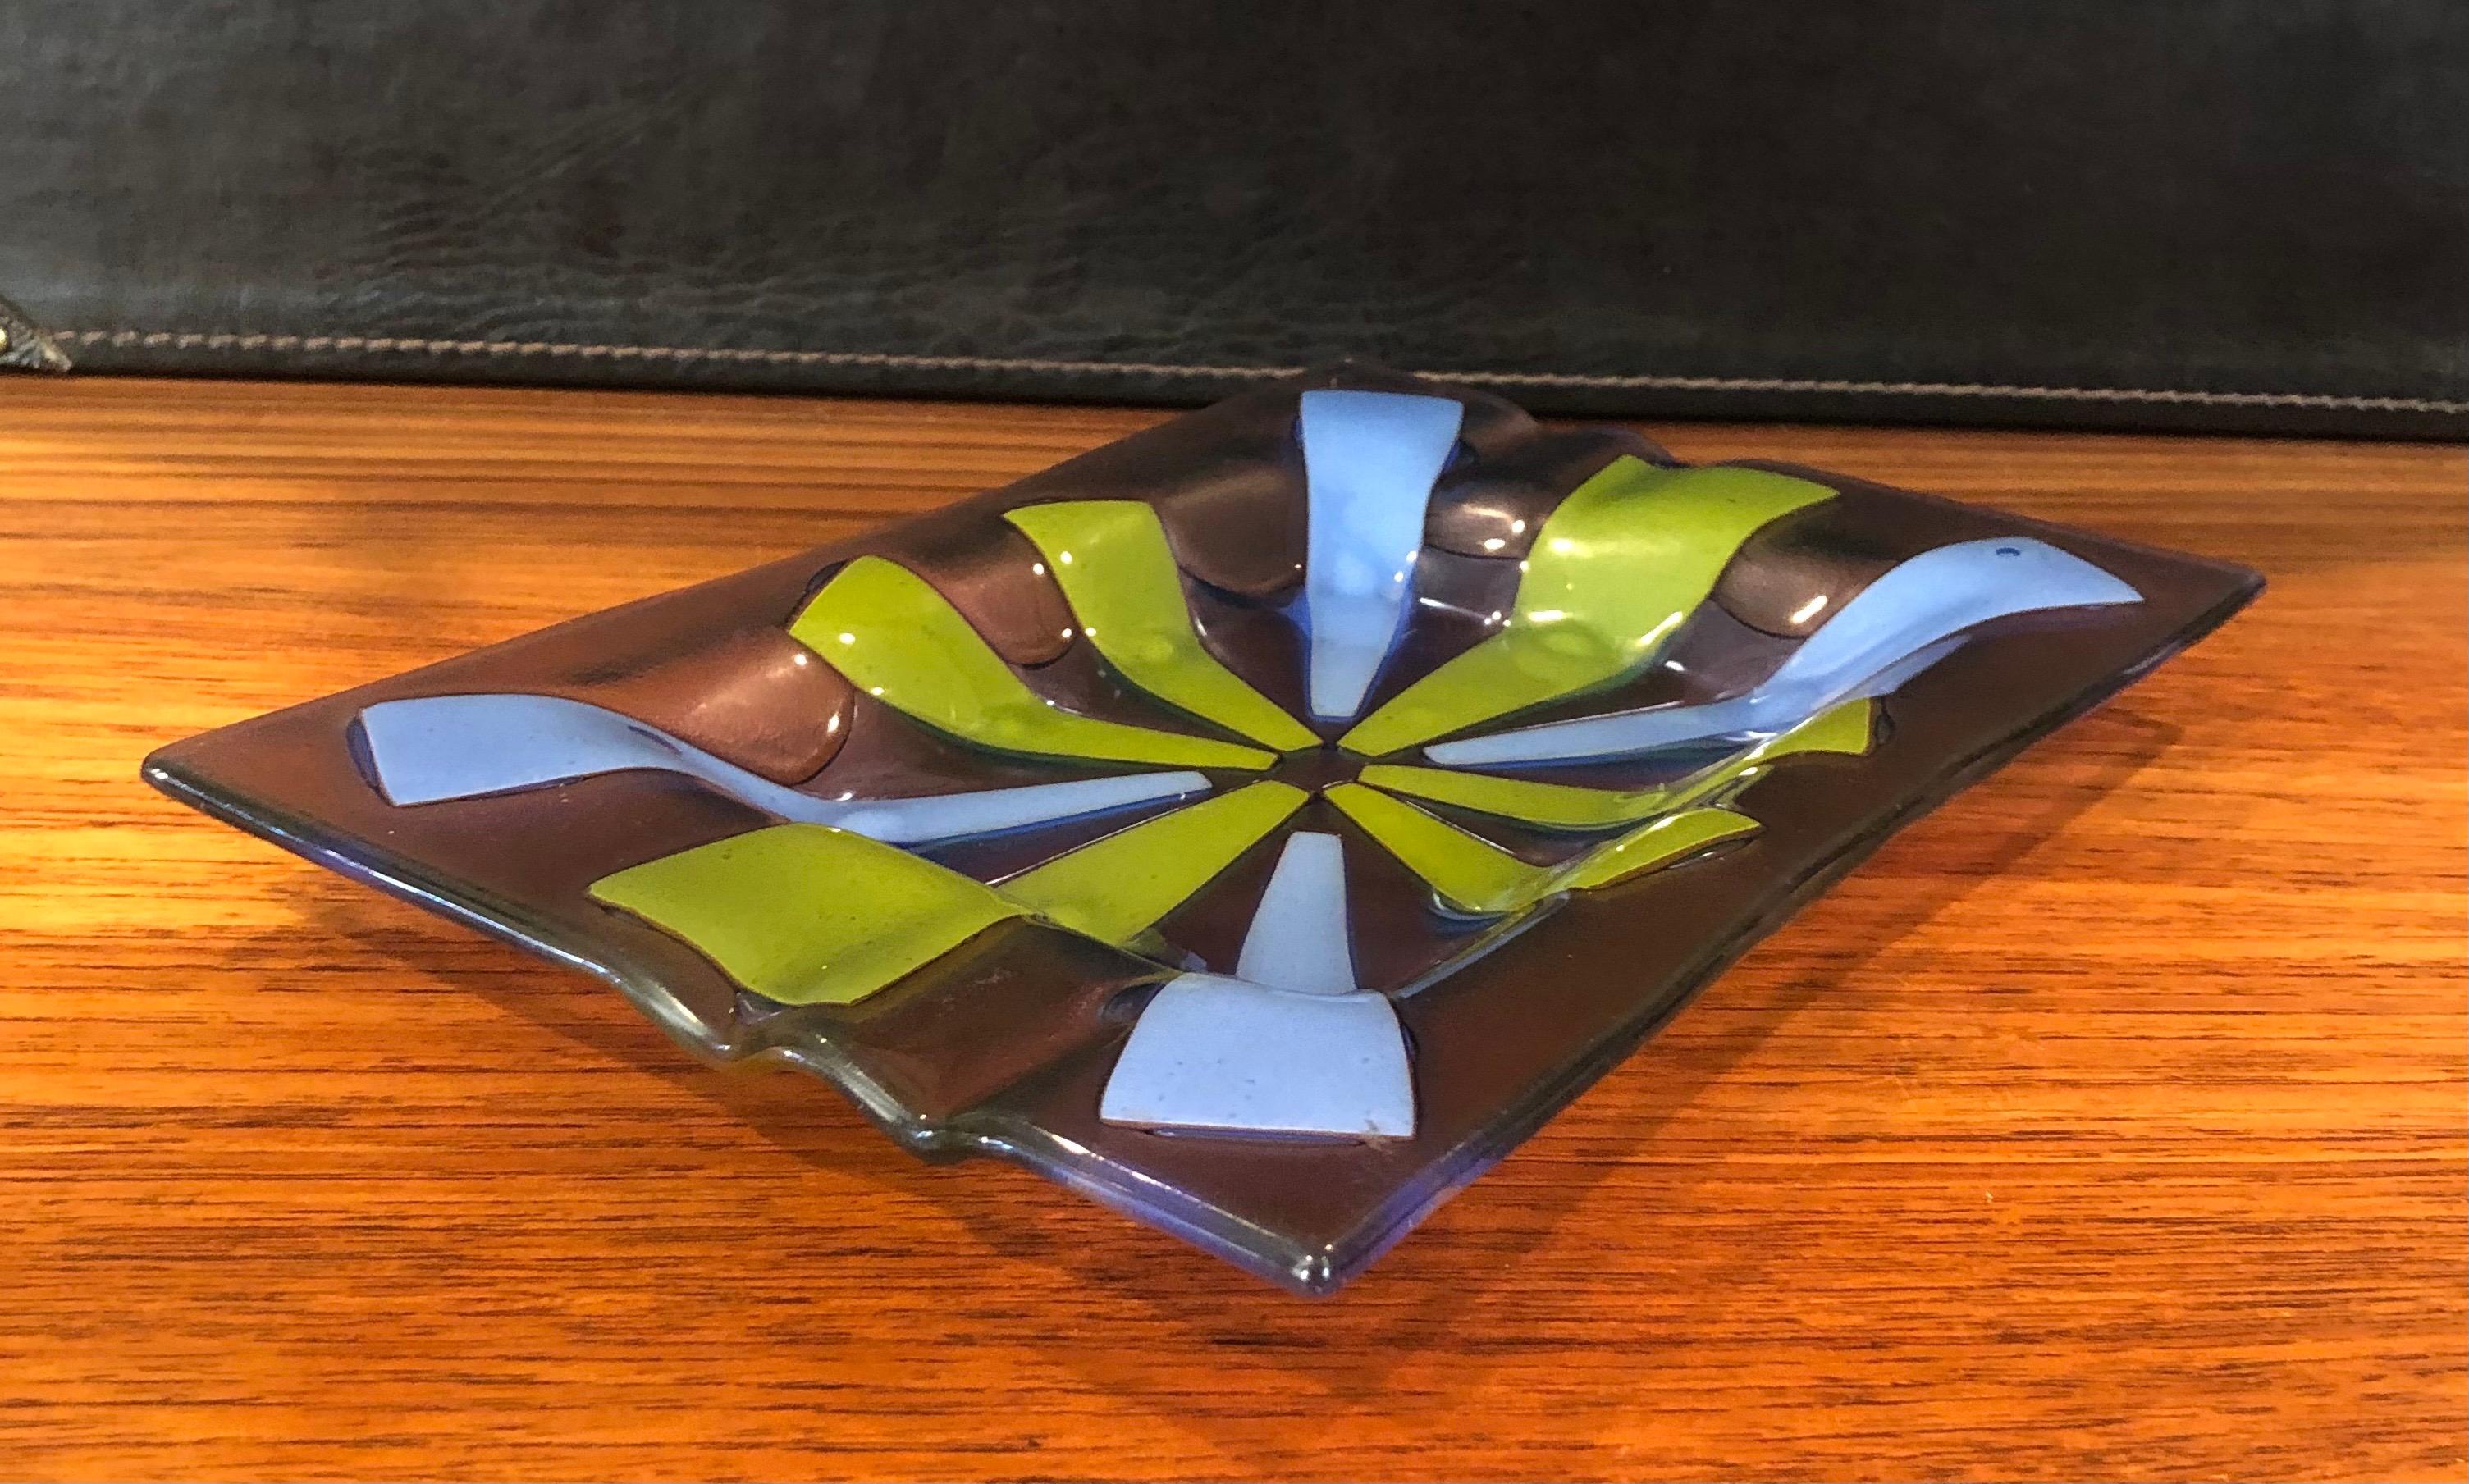 Midcentury fused art glass ashtray by Higgins, circa 1950s. The pattern, called “Tortoiseshell” is created by sandwiching enameled glass panels of periwinkle blue and avocado green between tinted lavender glass panels to create an atomic starburst